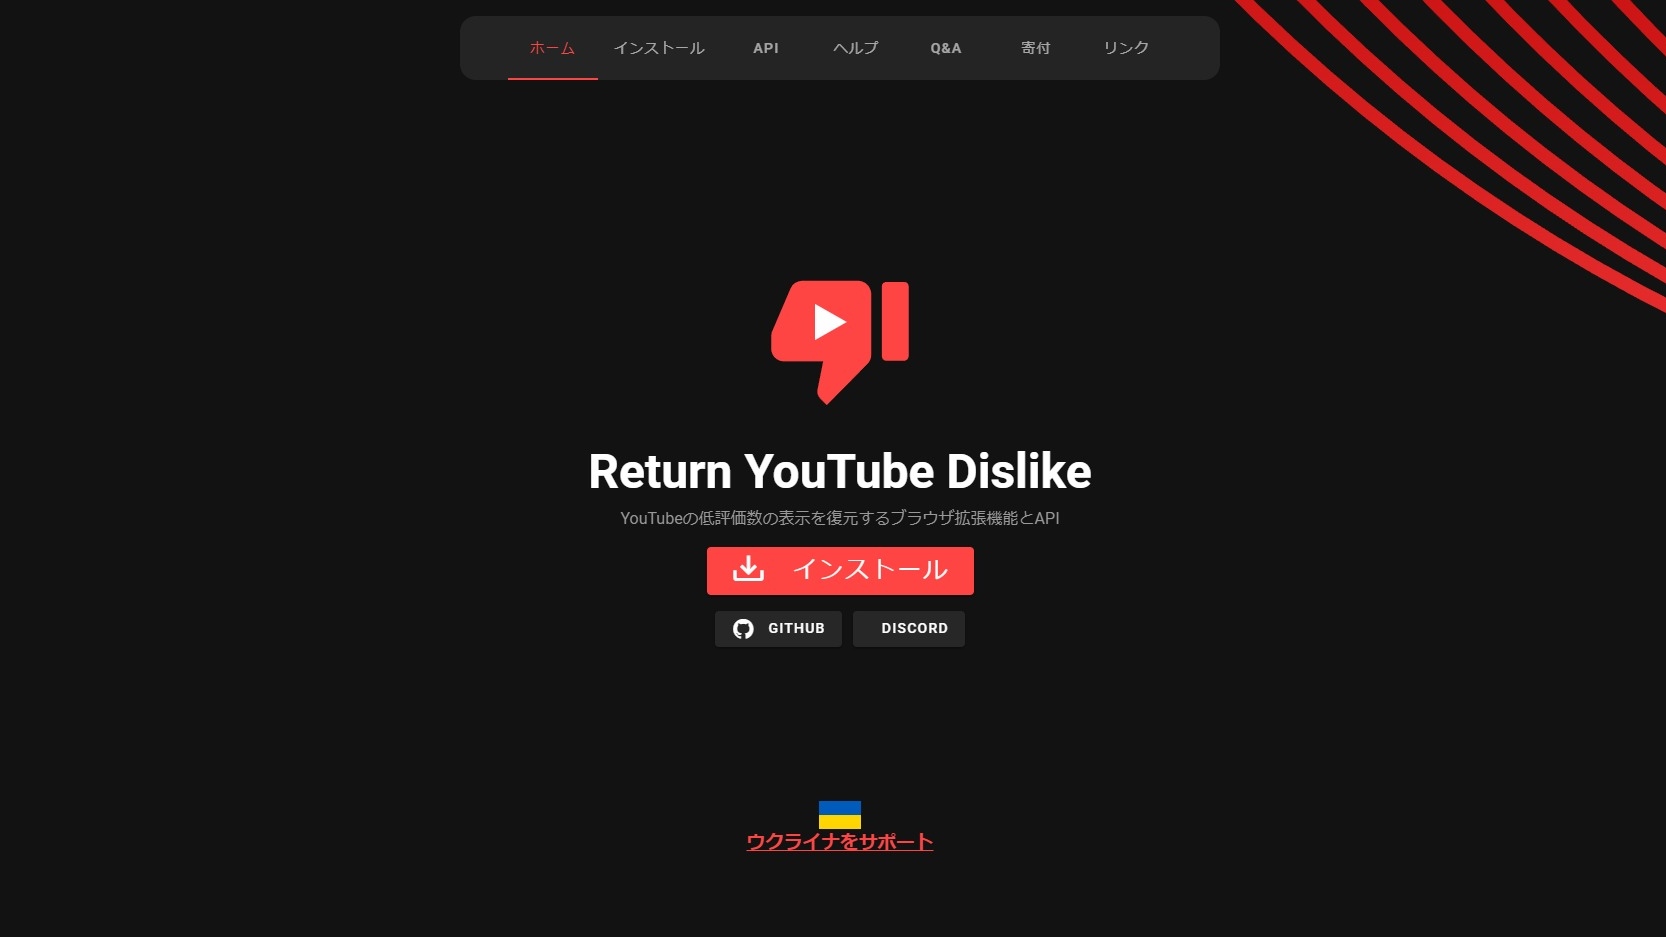 The Return YouTube Dislike browser extension returns wildly inaccurate numbers in some cases